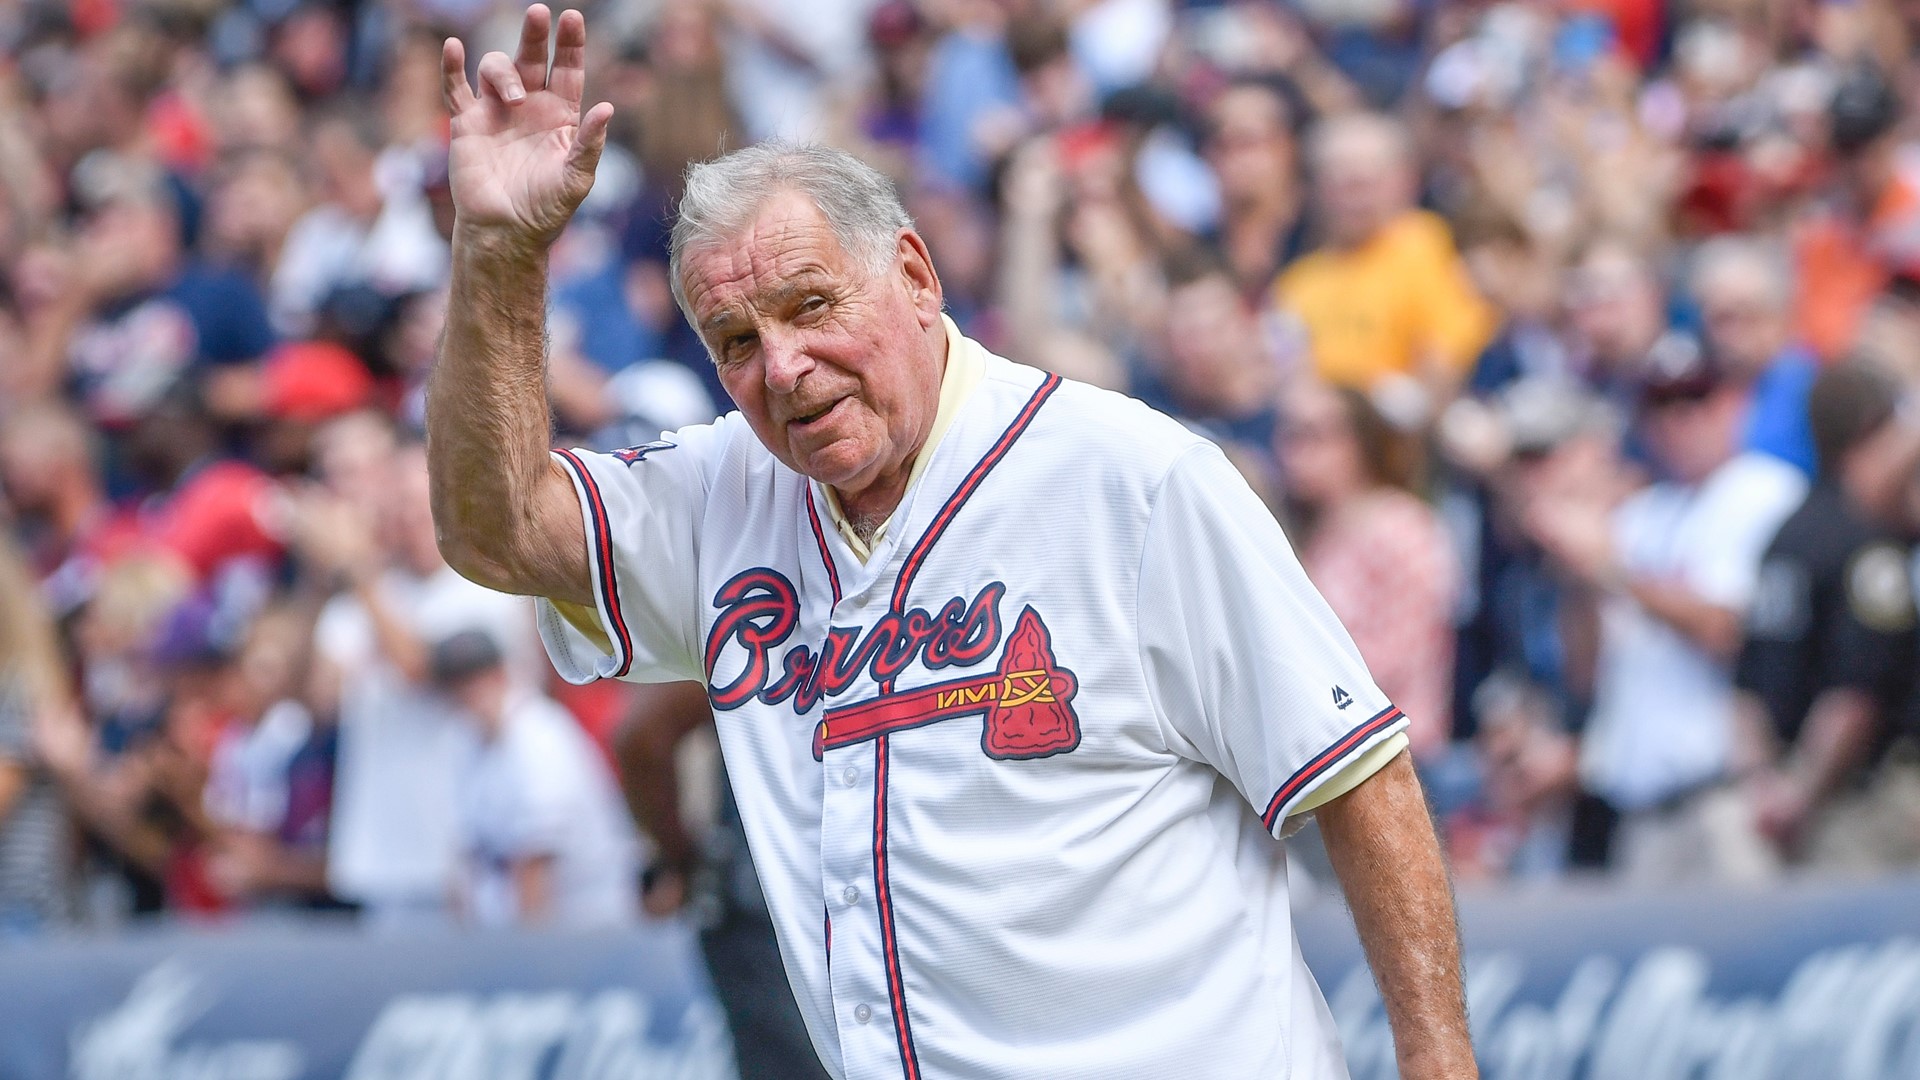 Bobby Cox's No. 6 retired by Braves - Deseret News